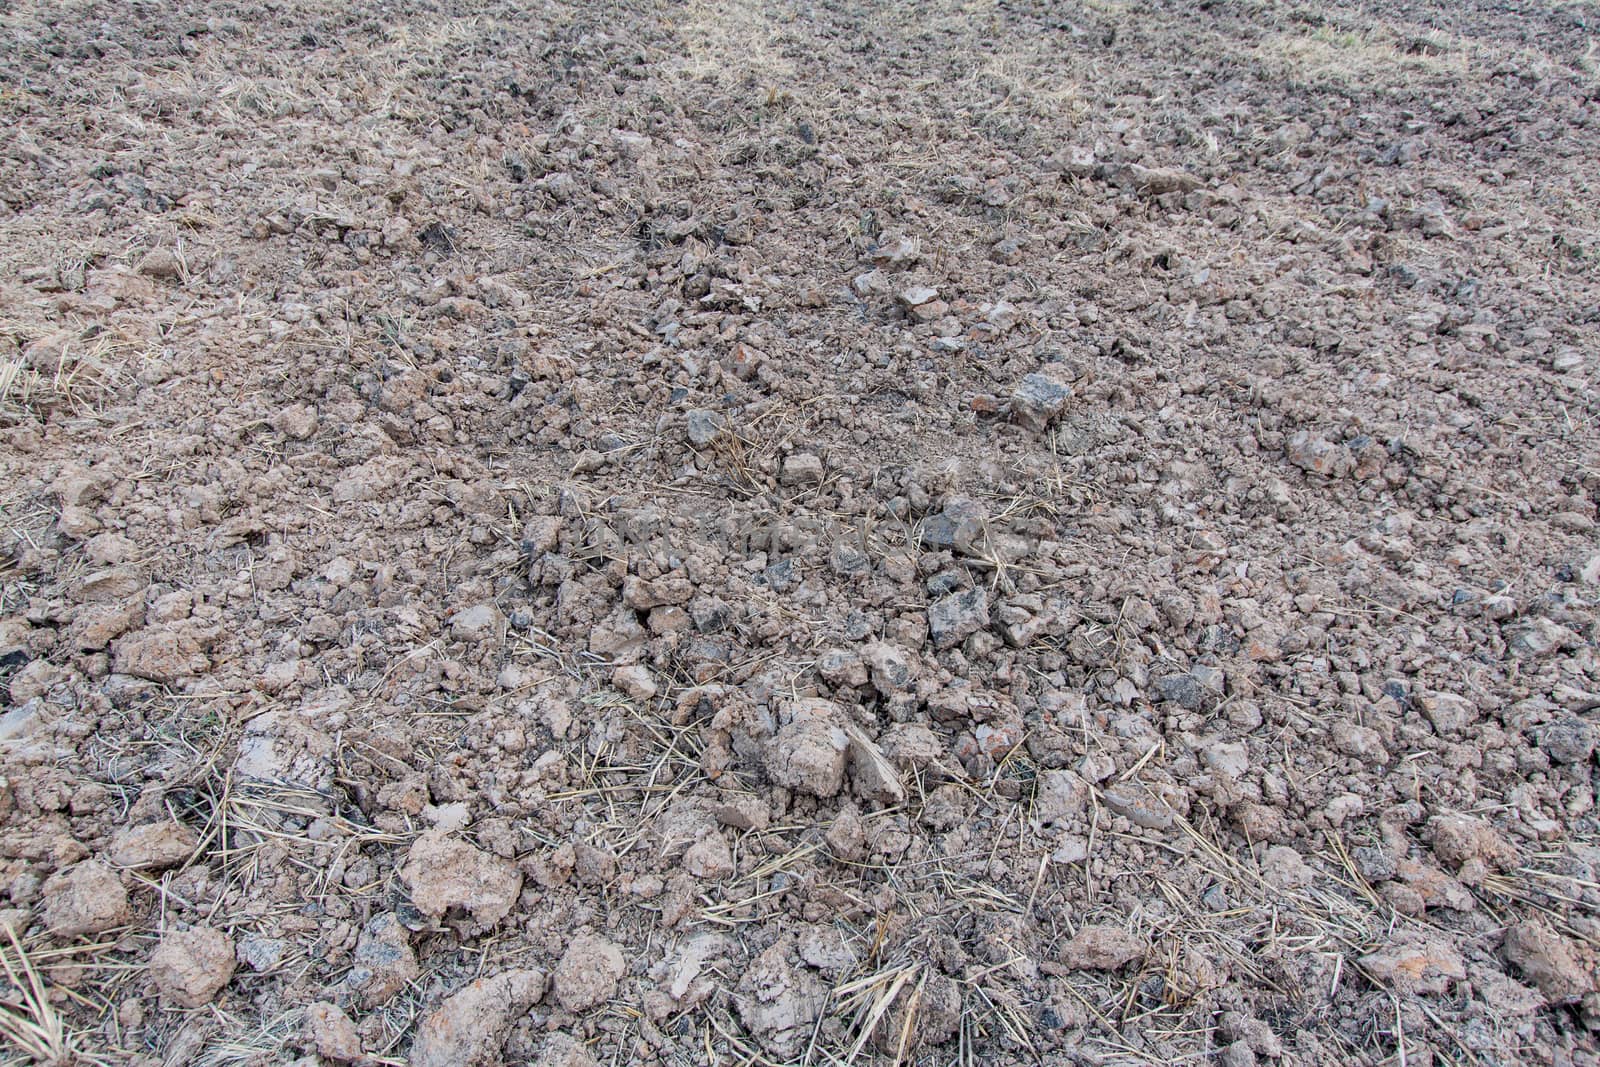 Rown soil of an agricultural field